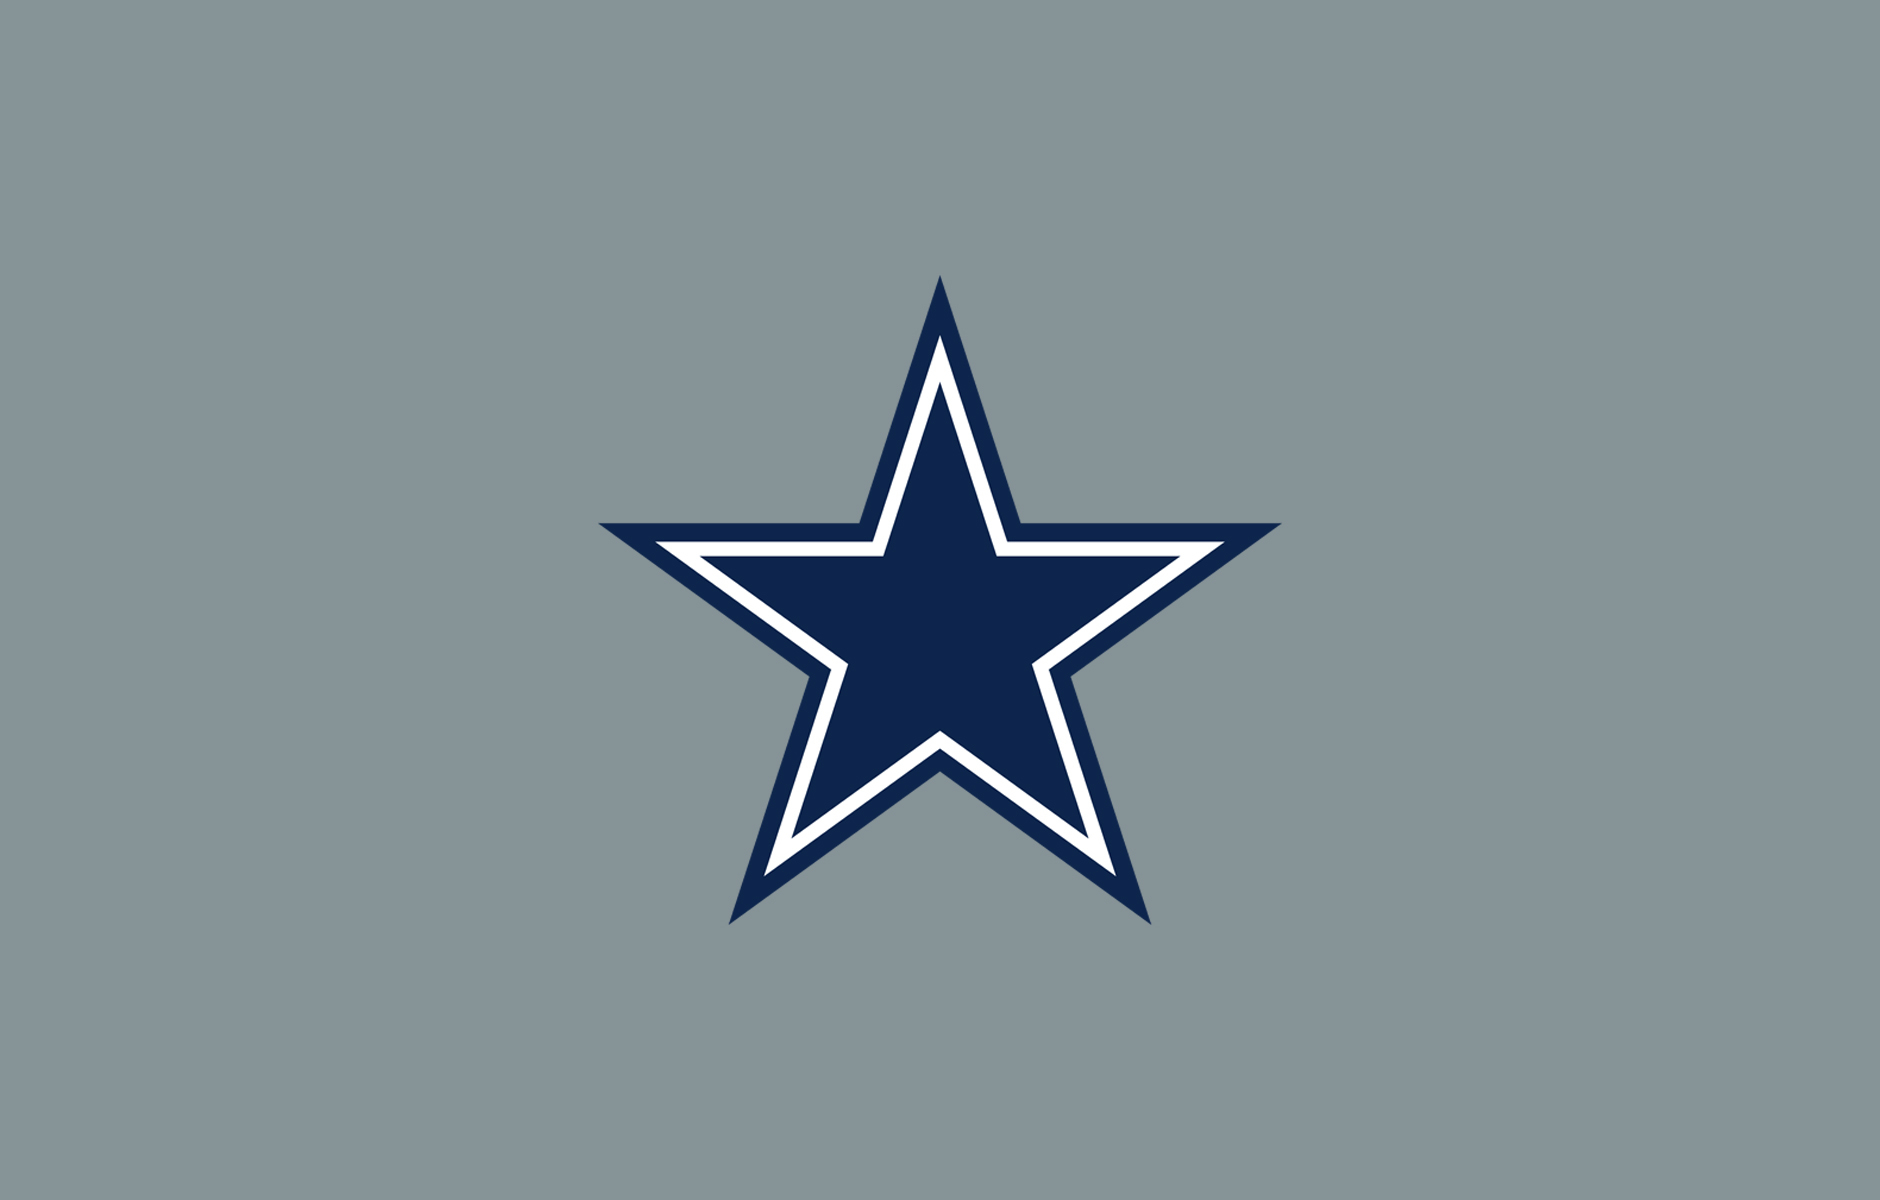 10 Most Popular Images Of Dallas Cowboys FULL HD 1080p For PC Desktop